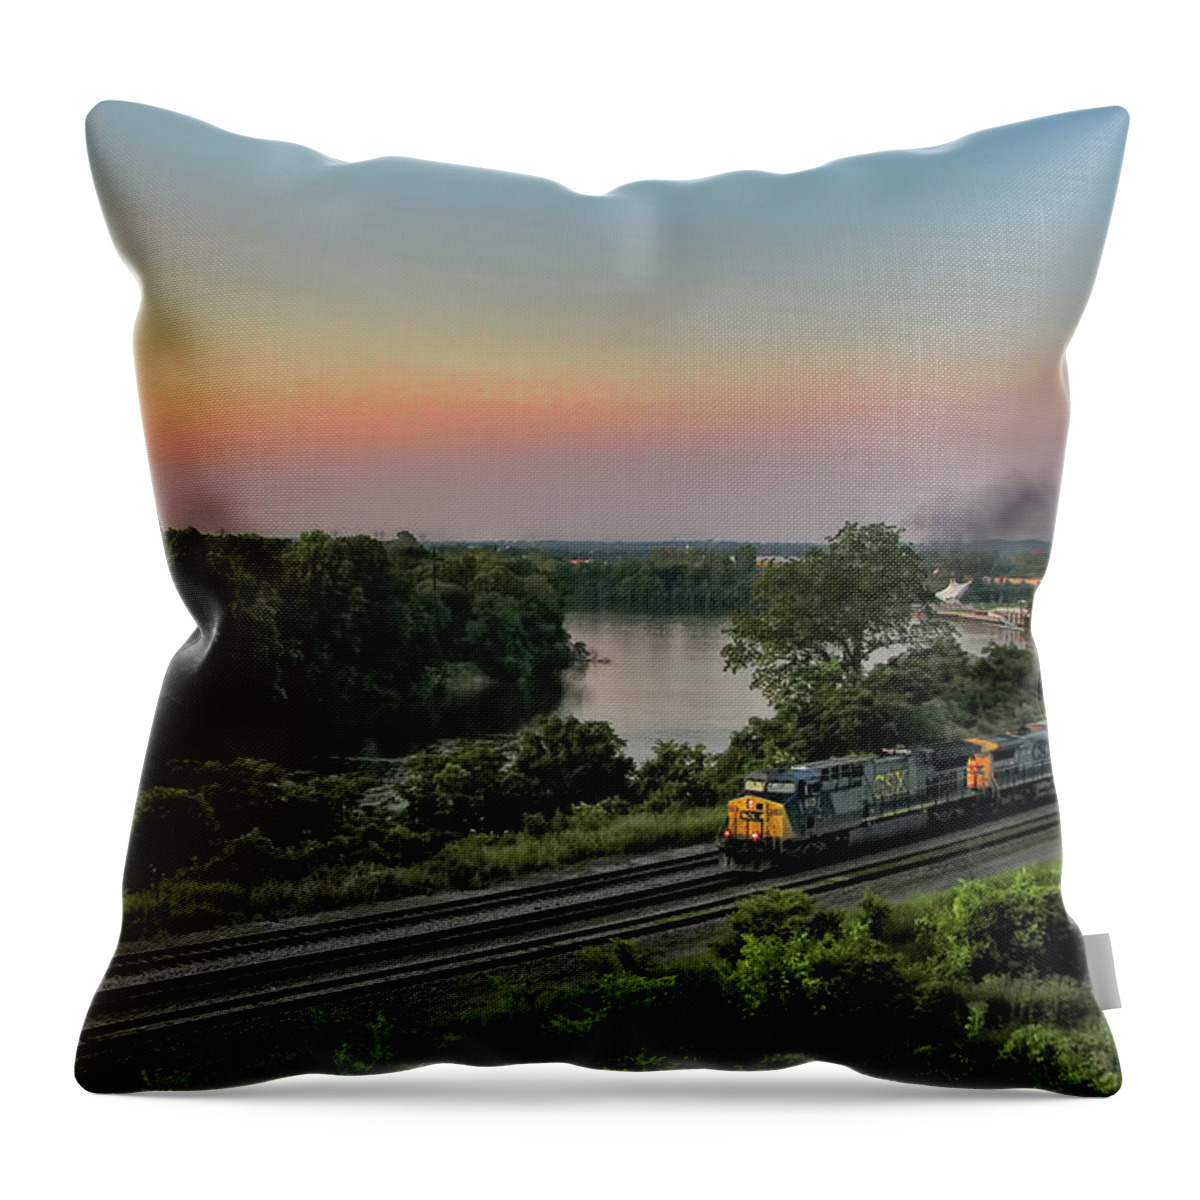 Train Throw Pillow featuring the photograph Alabama River Sunset by Tom Gort